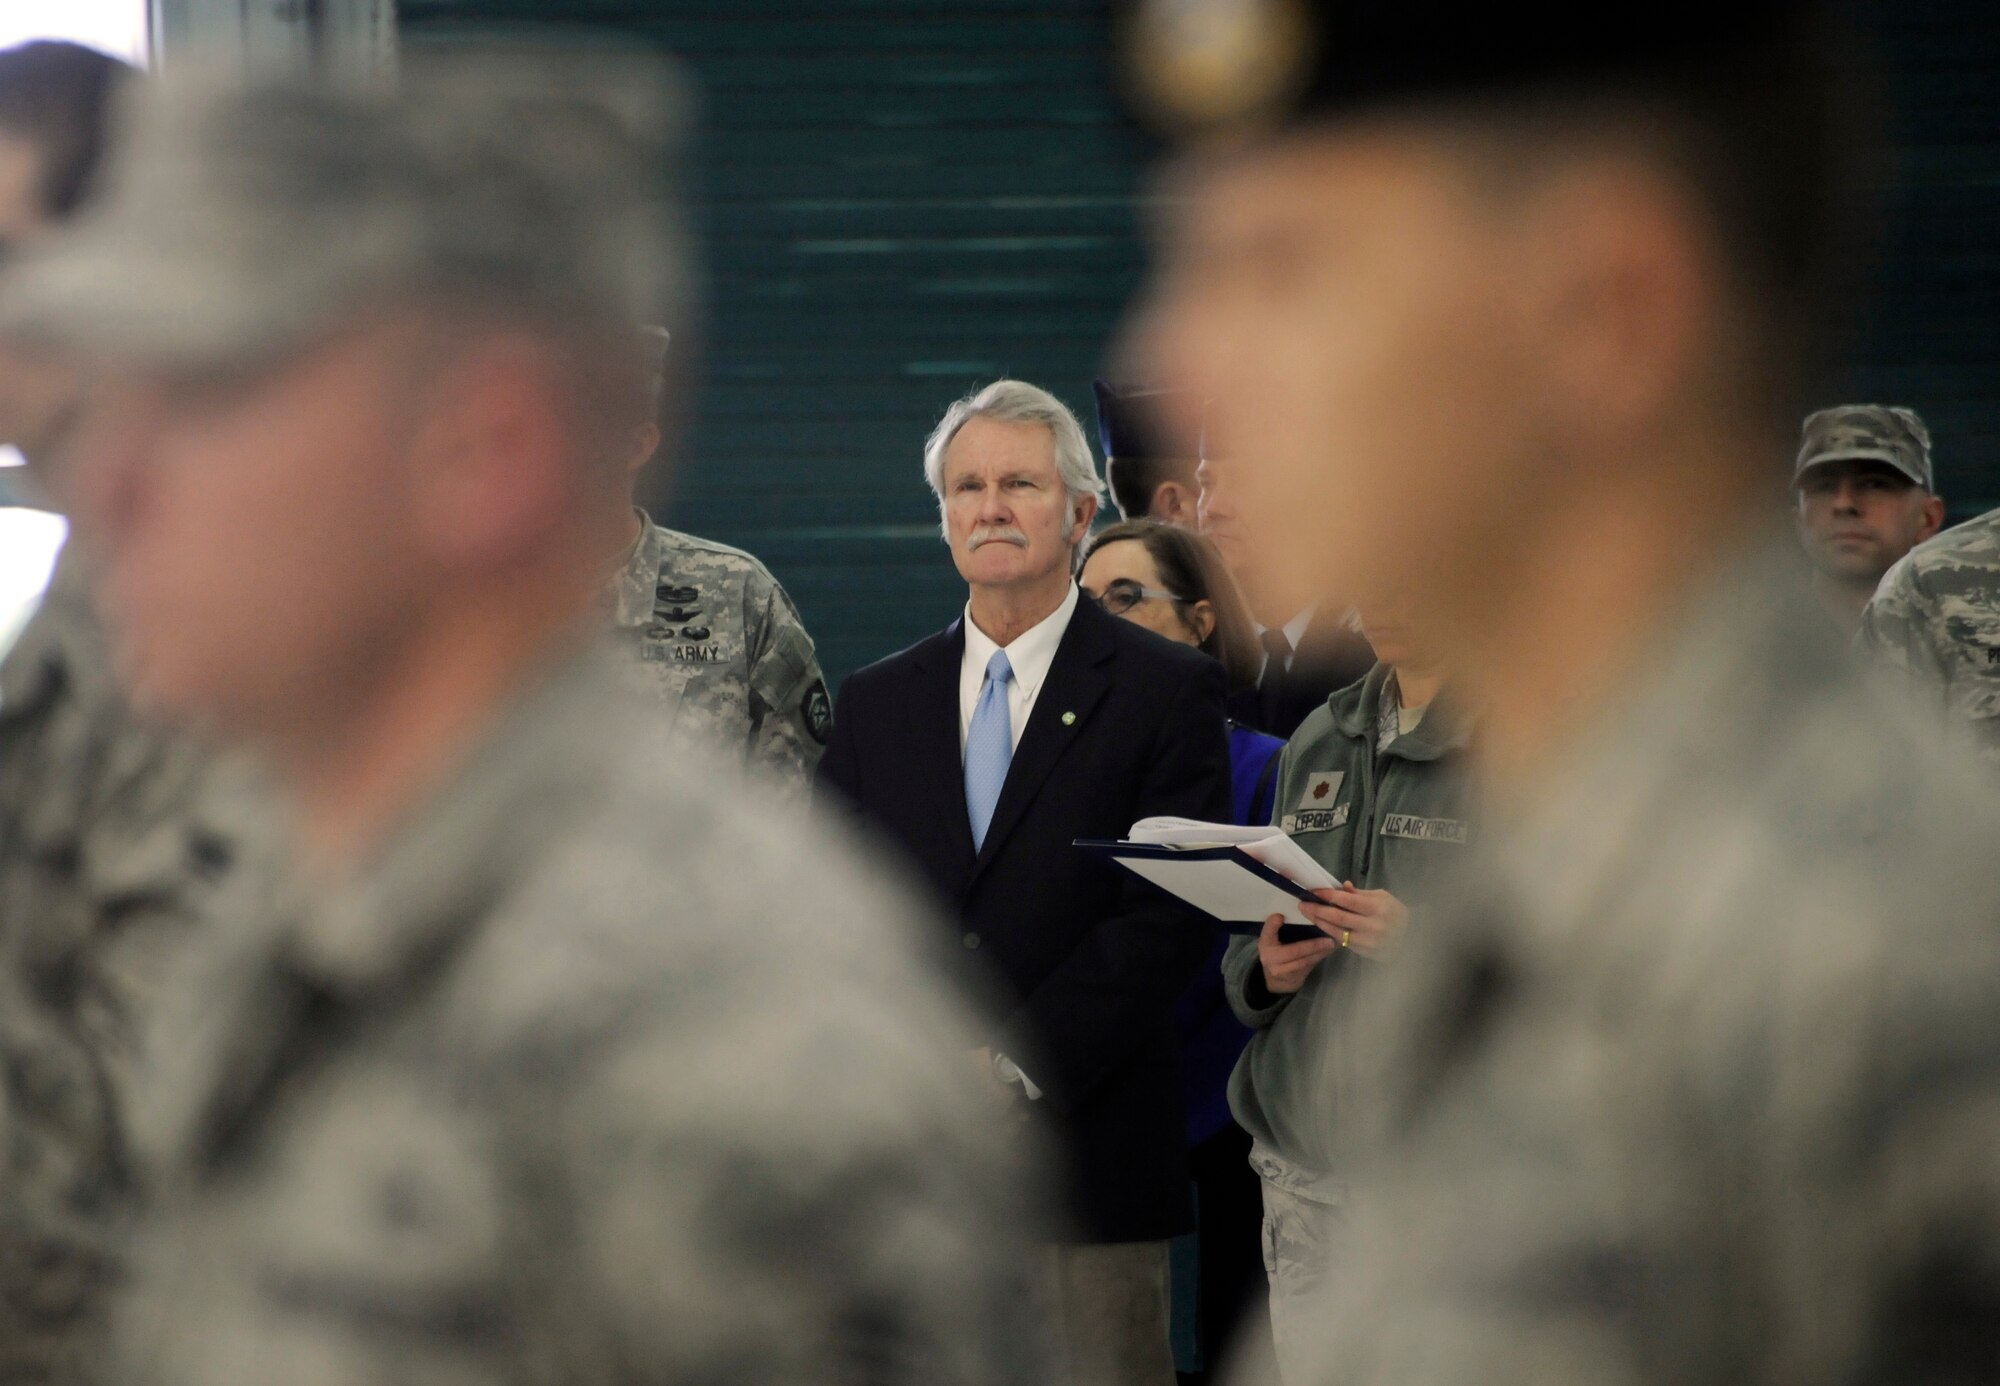 Oregon Governor John Kitzhaber awaits the beginning of the Demobilization Ceremony for the 142nd Fighter Wing Civil Engineer Squadron and Security Forces Squadron at the Portland Air National Guard Base, Ore., Dec. 7, 2014. (U.S. Air National Guard photo by Tech. Sgt. John Hughel, 142nd Fighter Wing Public Affairs/Released)